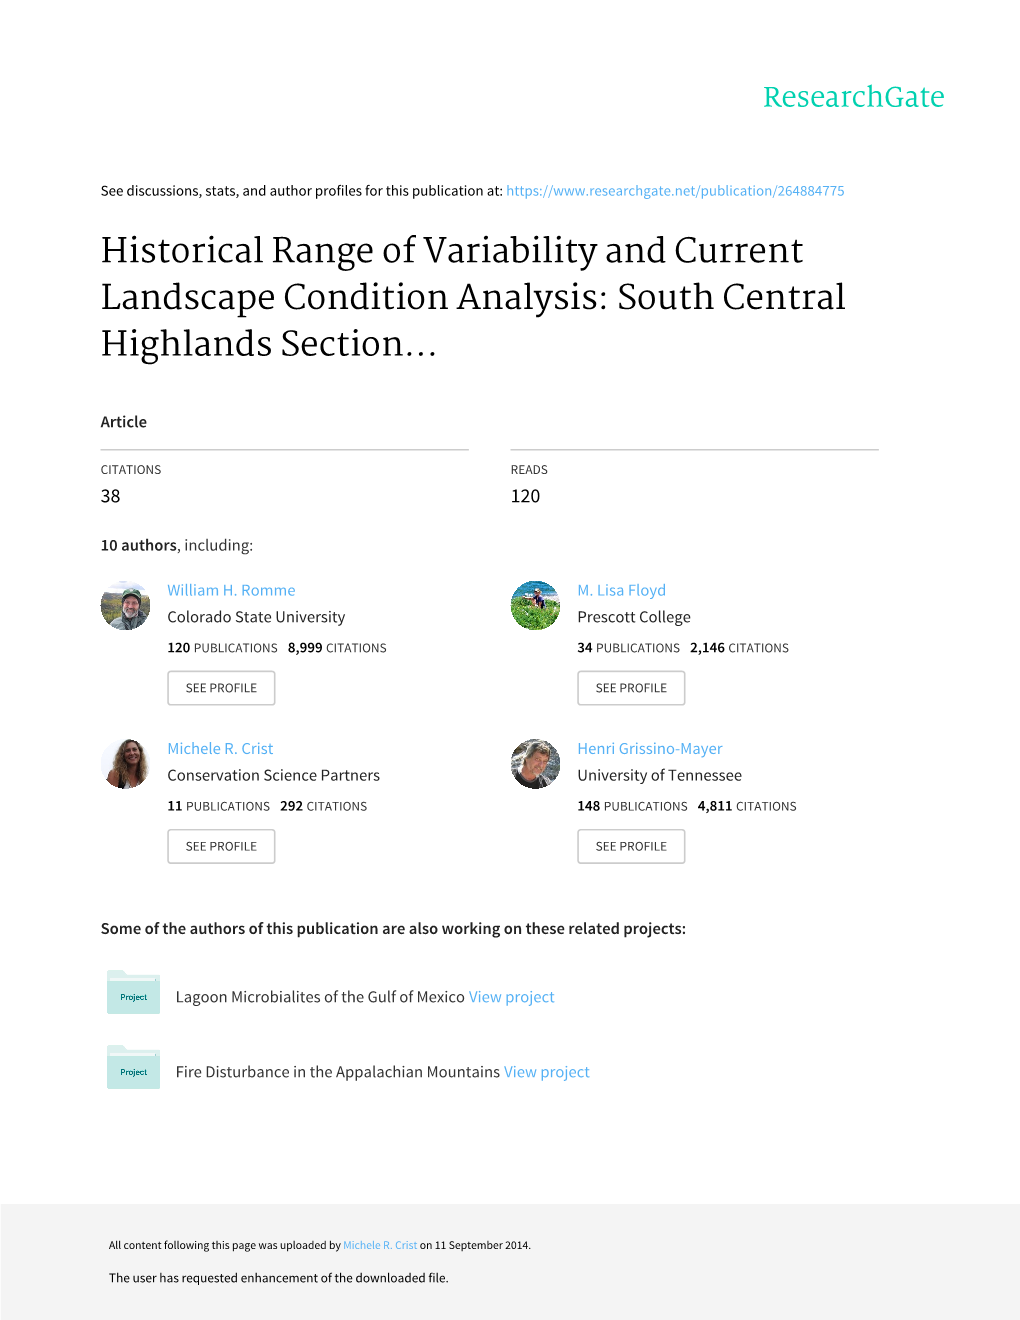 Historical Range of Variability and Current Landscape Condition Analysis: South Central Highlands Section